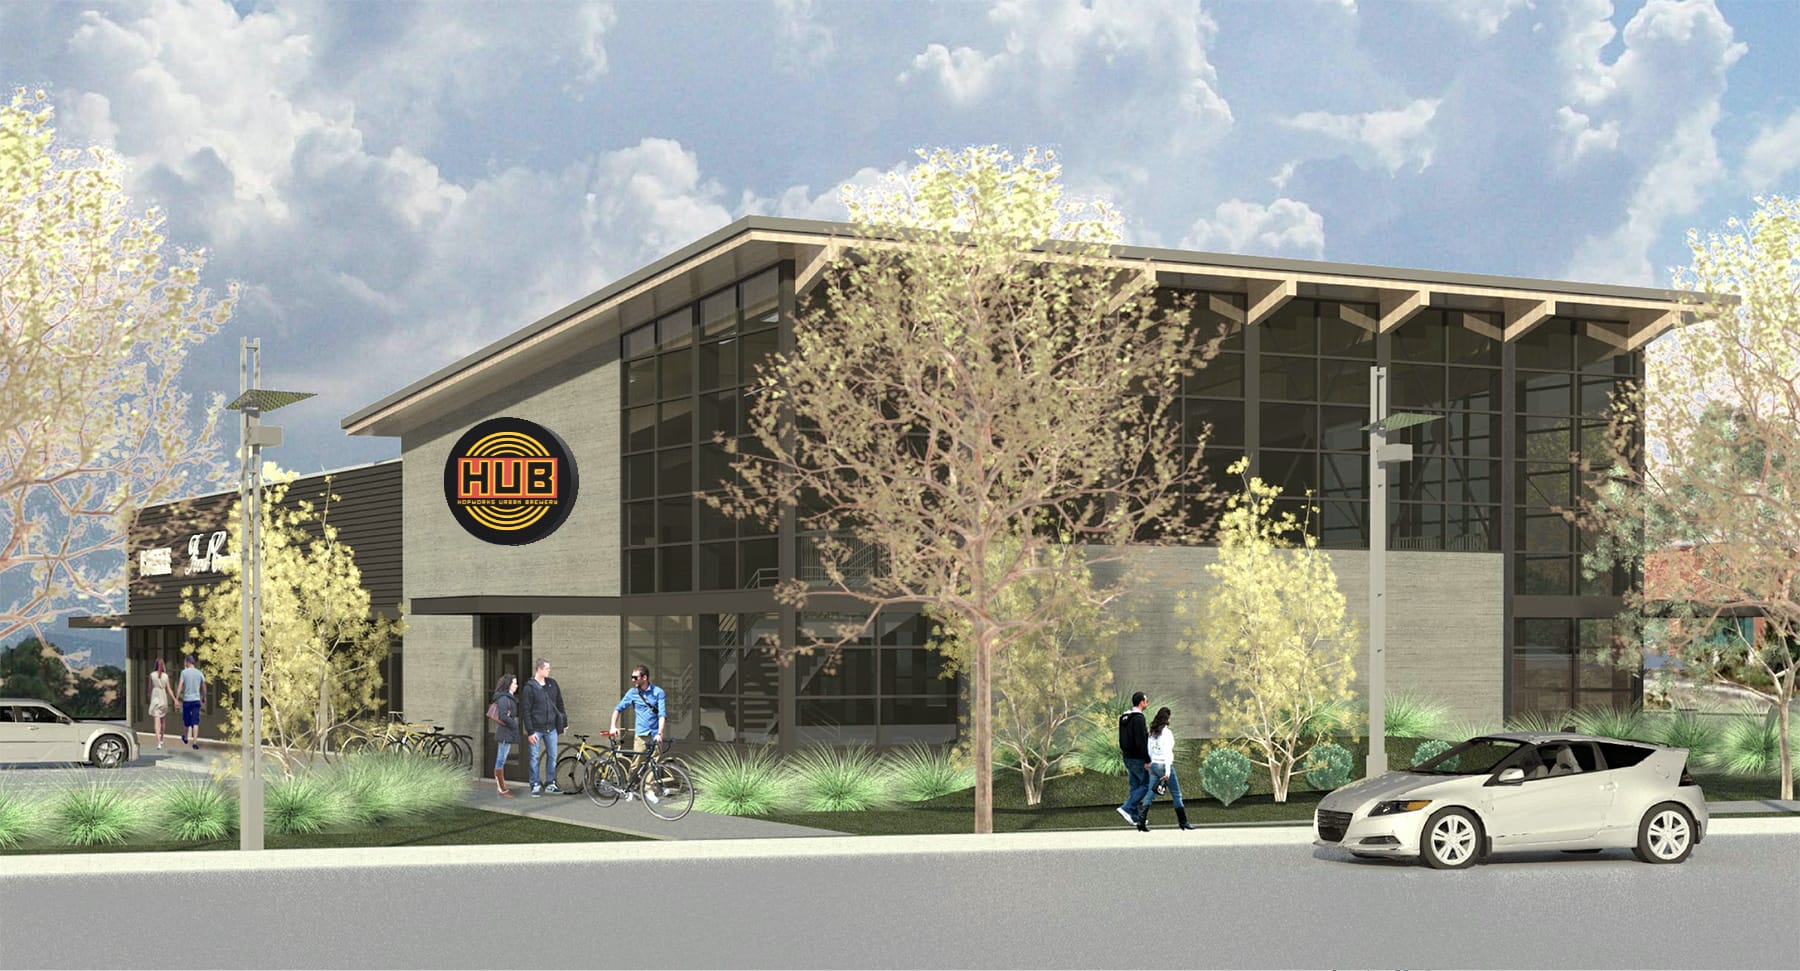 Portland-based Hopworks Urban Brewery is opening a location in at the Columbia Tech Center Vancouver.